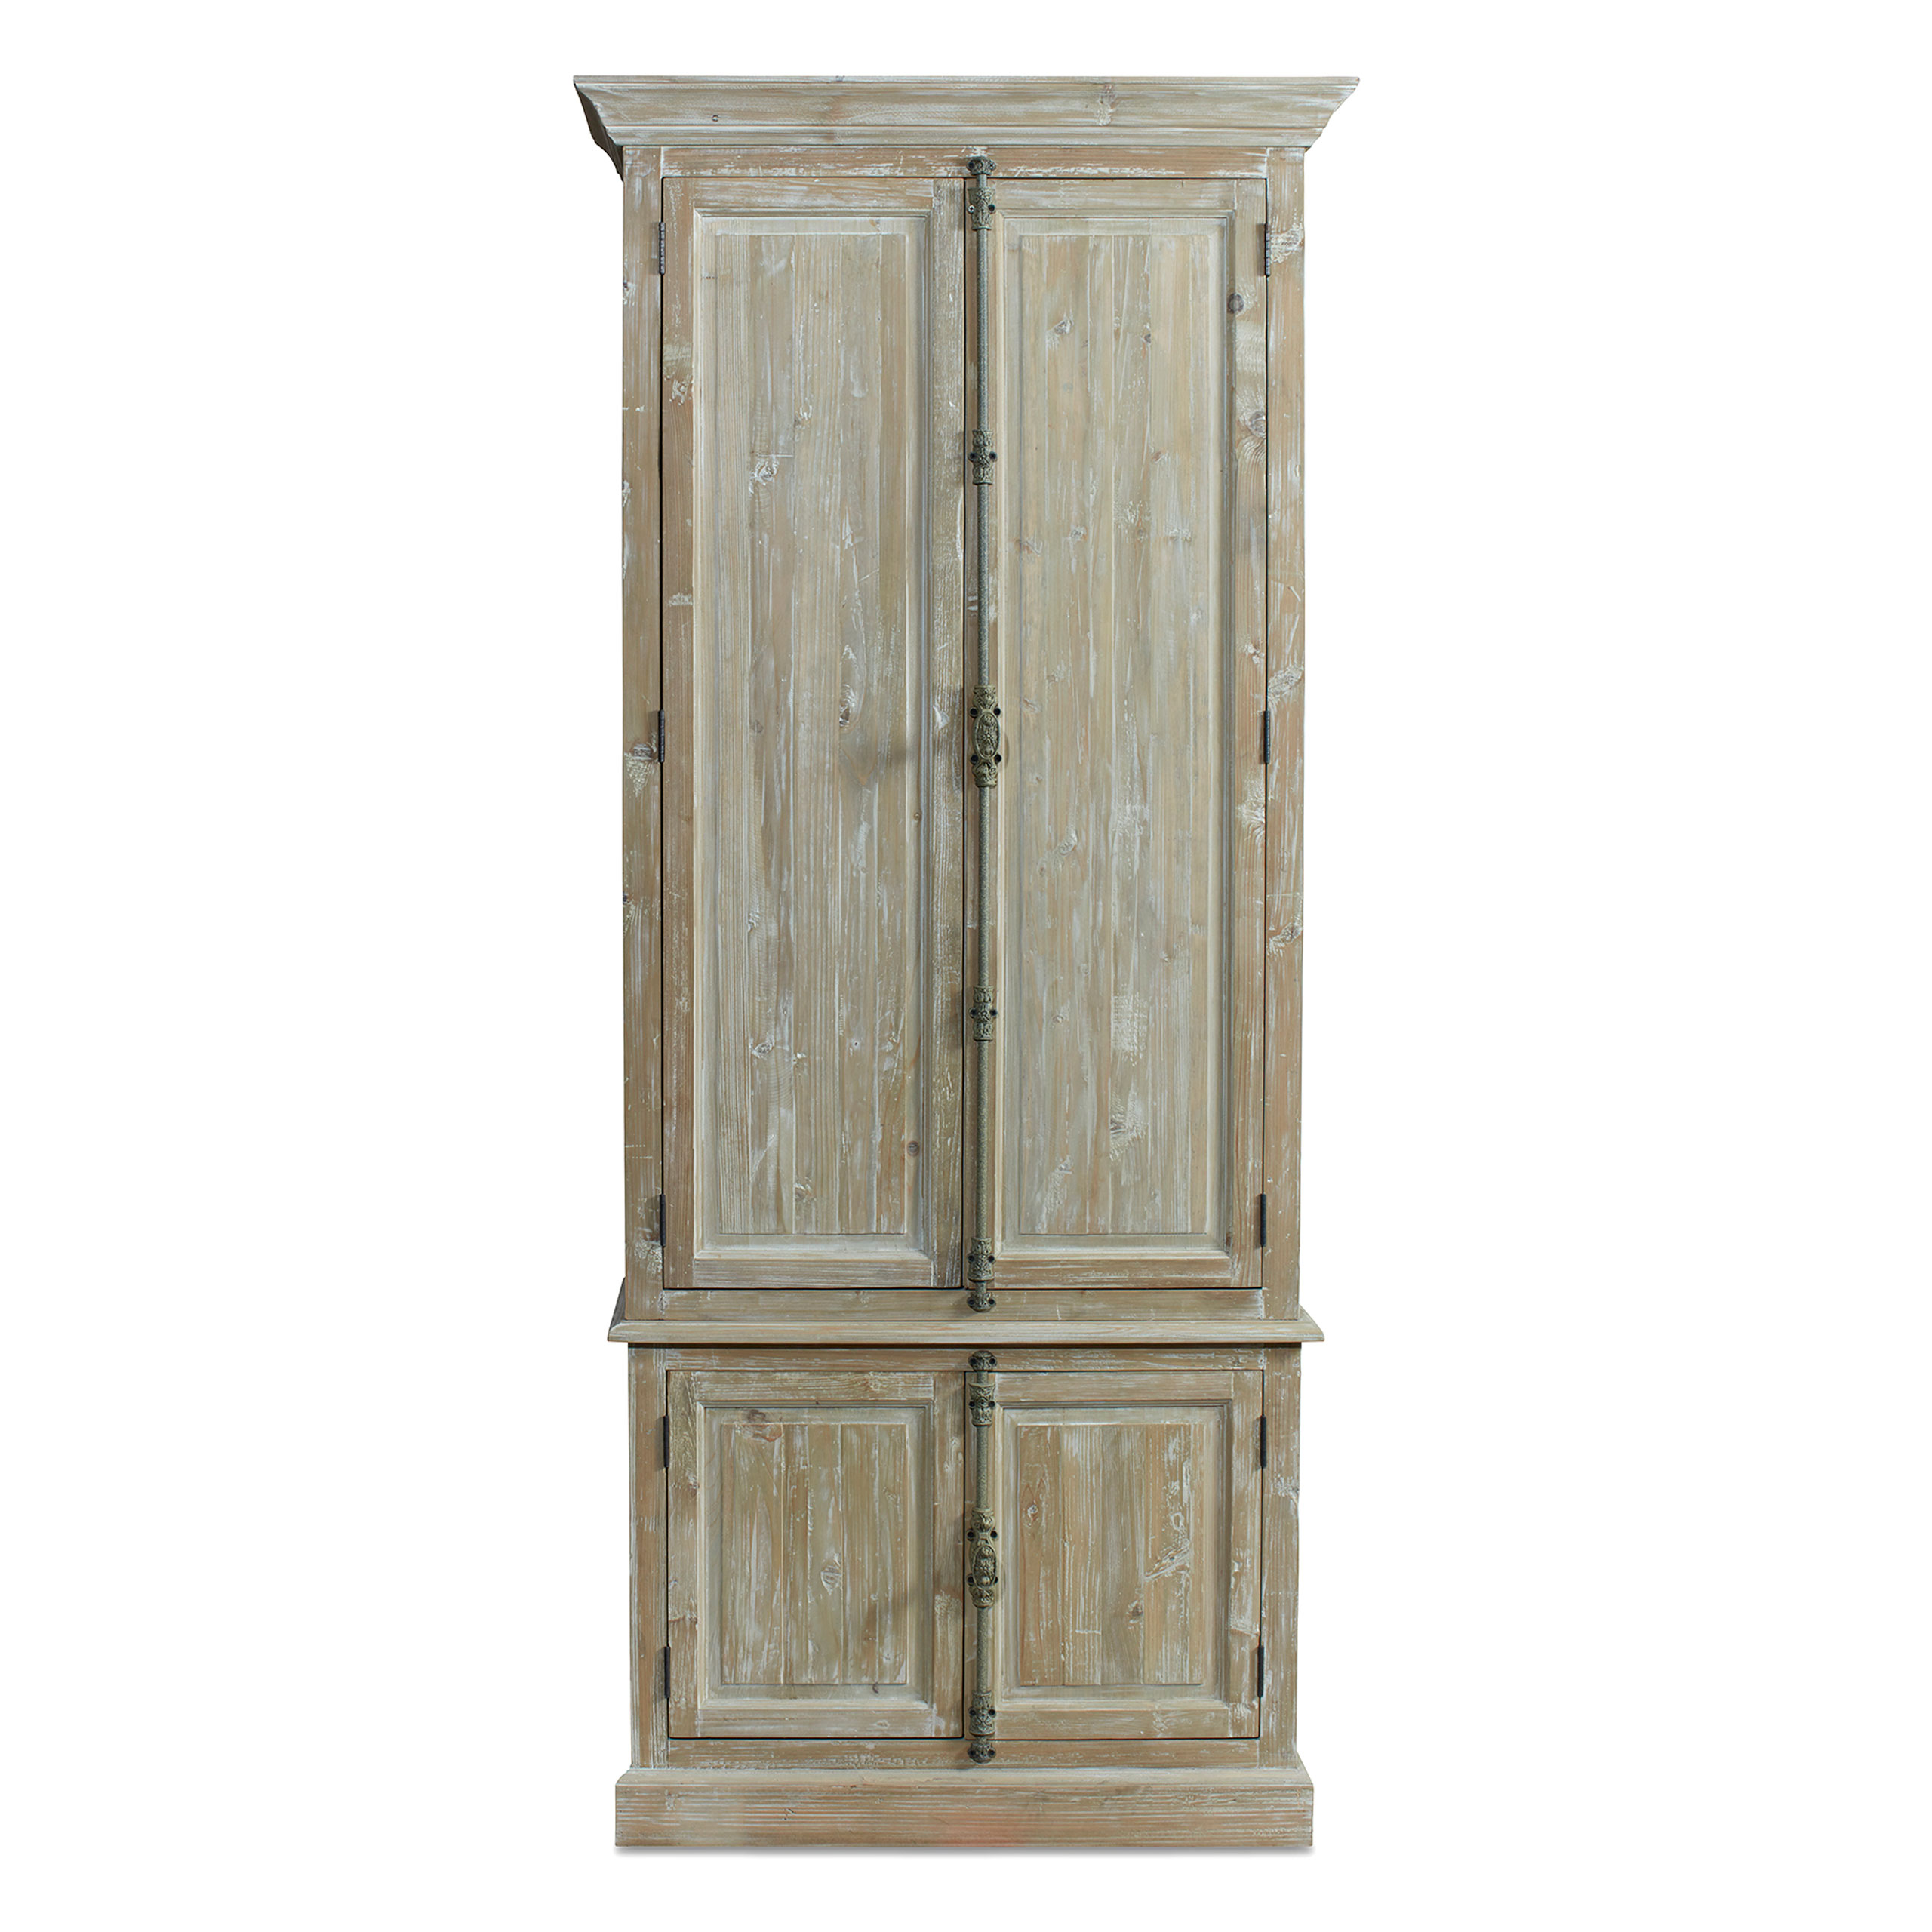 Stockport Four-Door Cabinet in Wash Finish